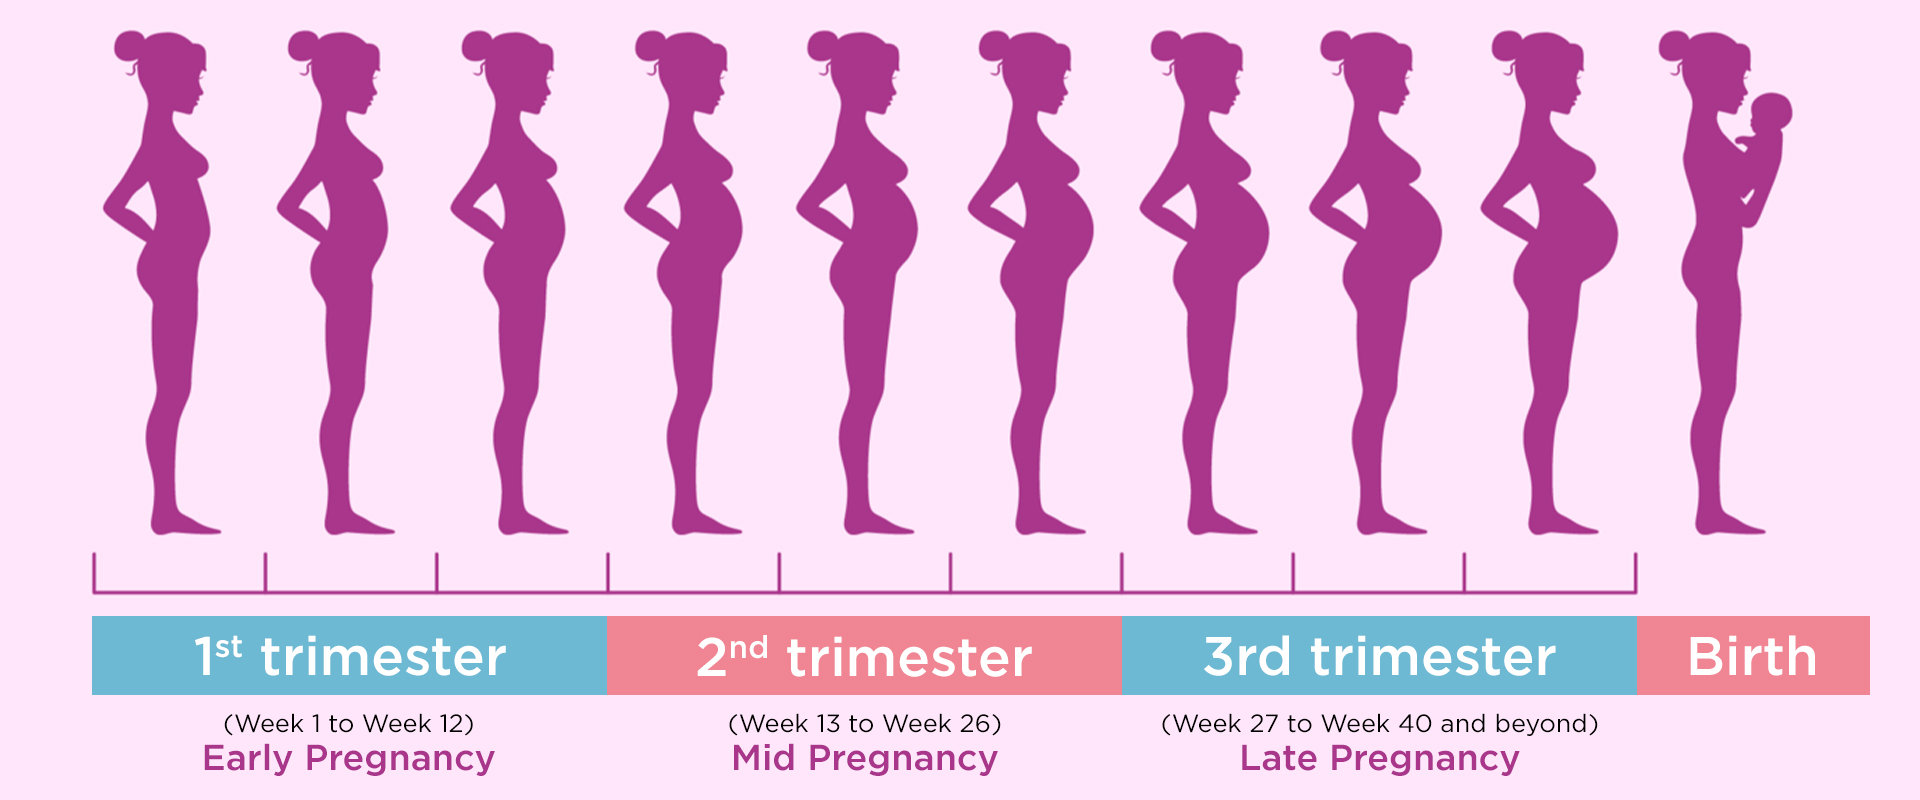 Pregnancy stages shown in the trimester pattern by Dr. Harshrika Holkar, the best Obstetrician & Gynecologist in Thane,  Mumbai specialized in Normal Delivery, High-Risk Obstetrics, Hysterectomy, Caesarean Section, Laparoscopic & Hysteroscopy, Fibroids, PCOS, Endometriosis, & Menstrual Related issues.